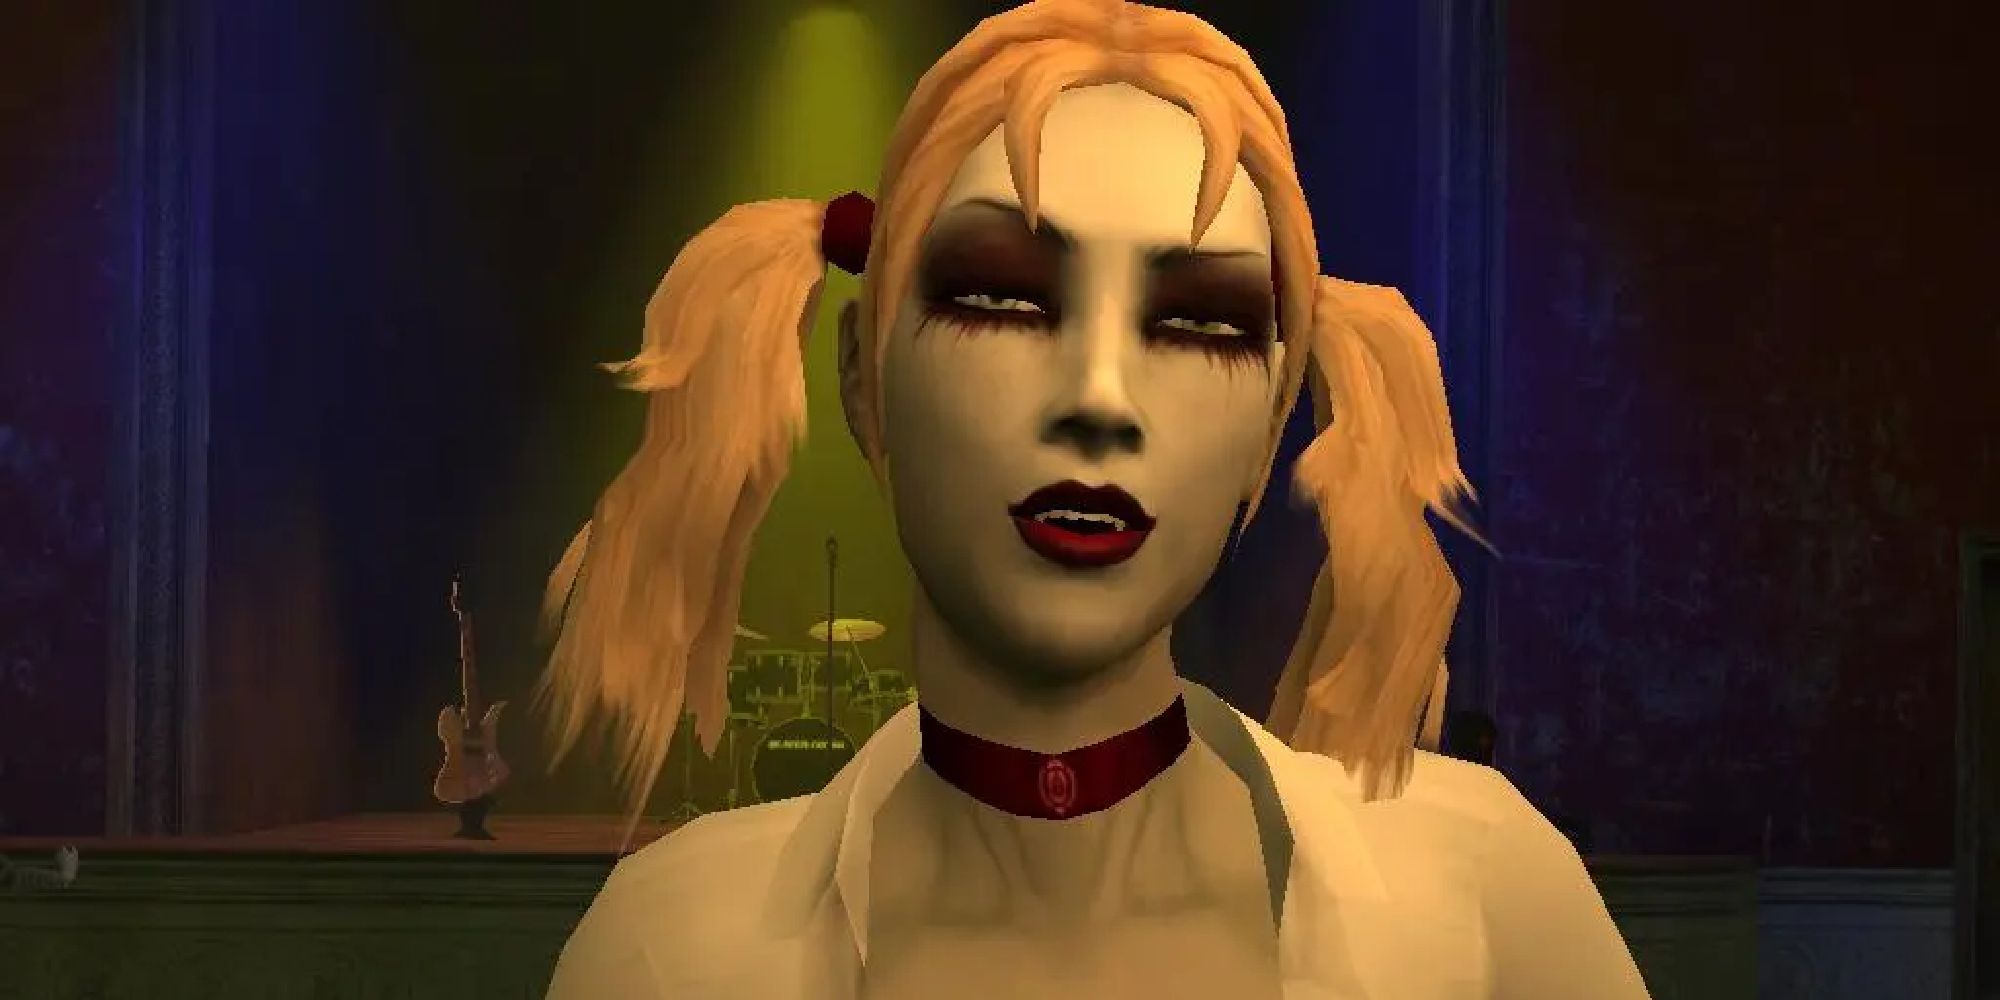 Jeanette smirks at the player in Vampire: The Masquerade - Bloodlines